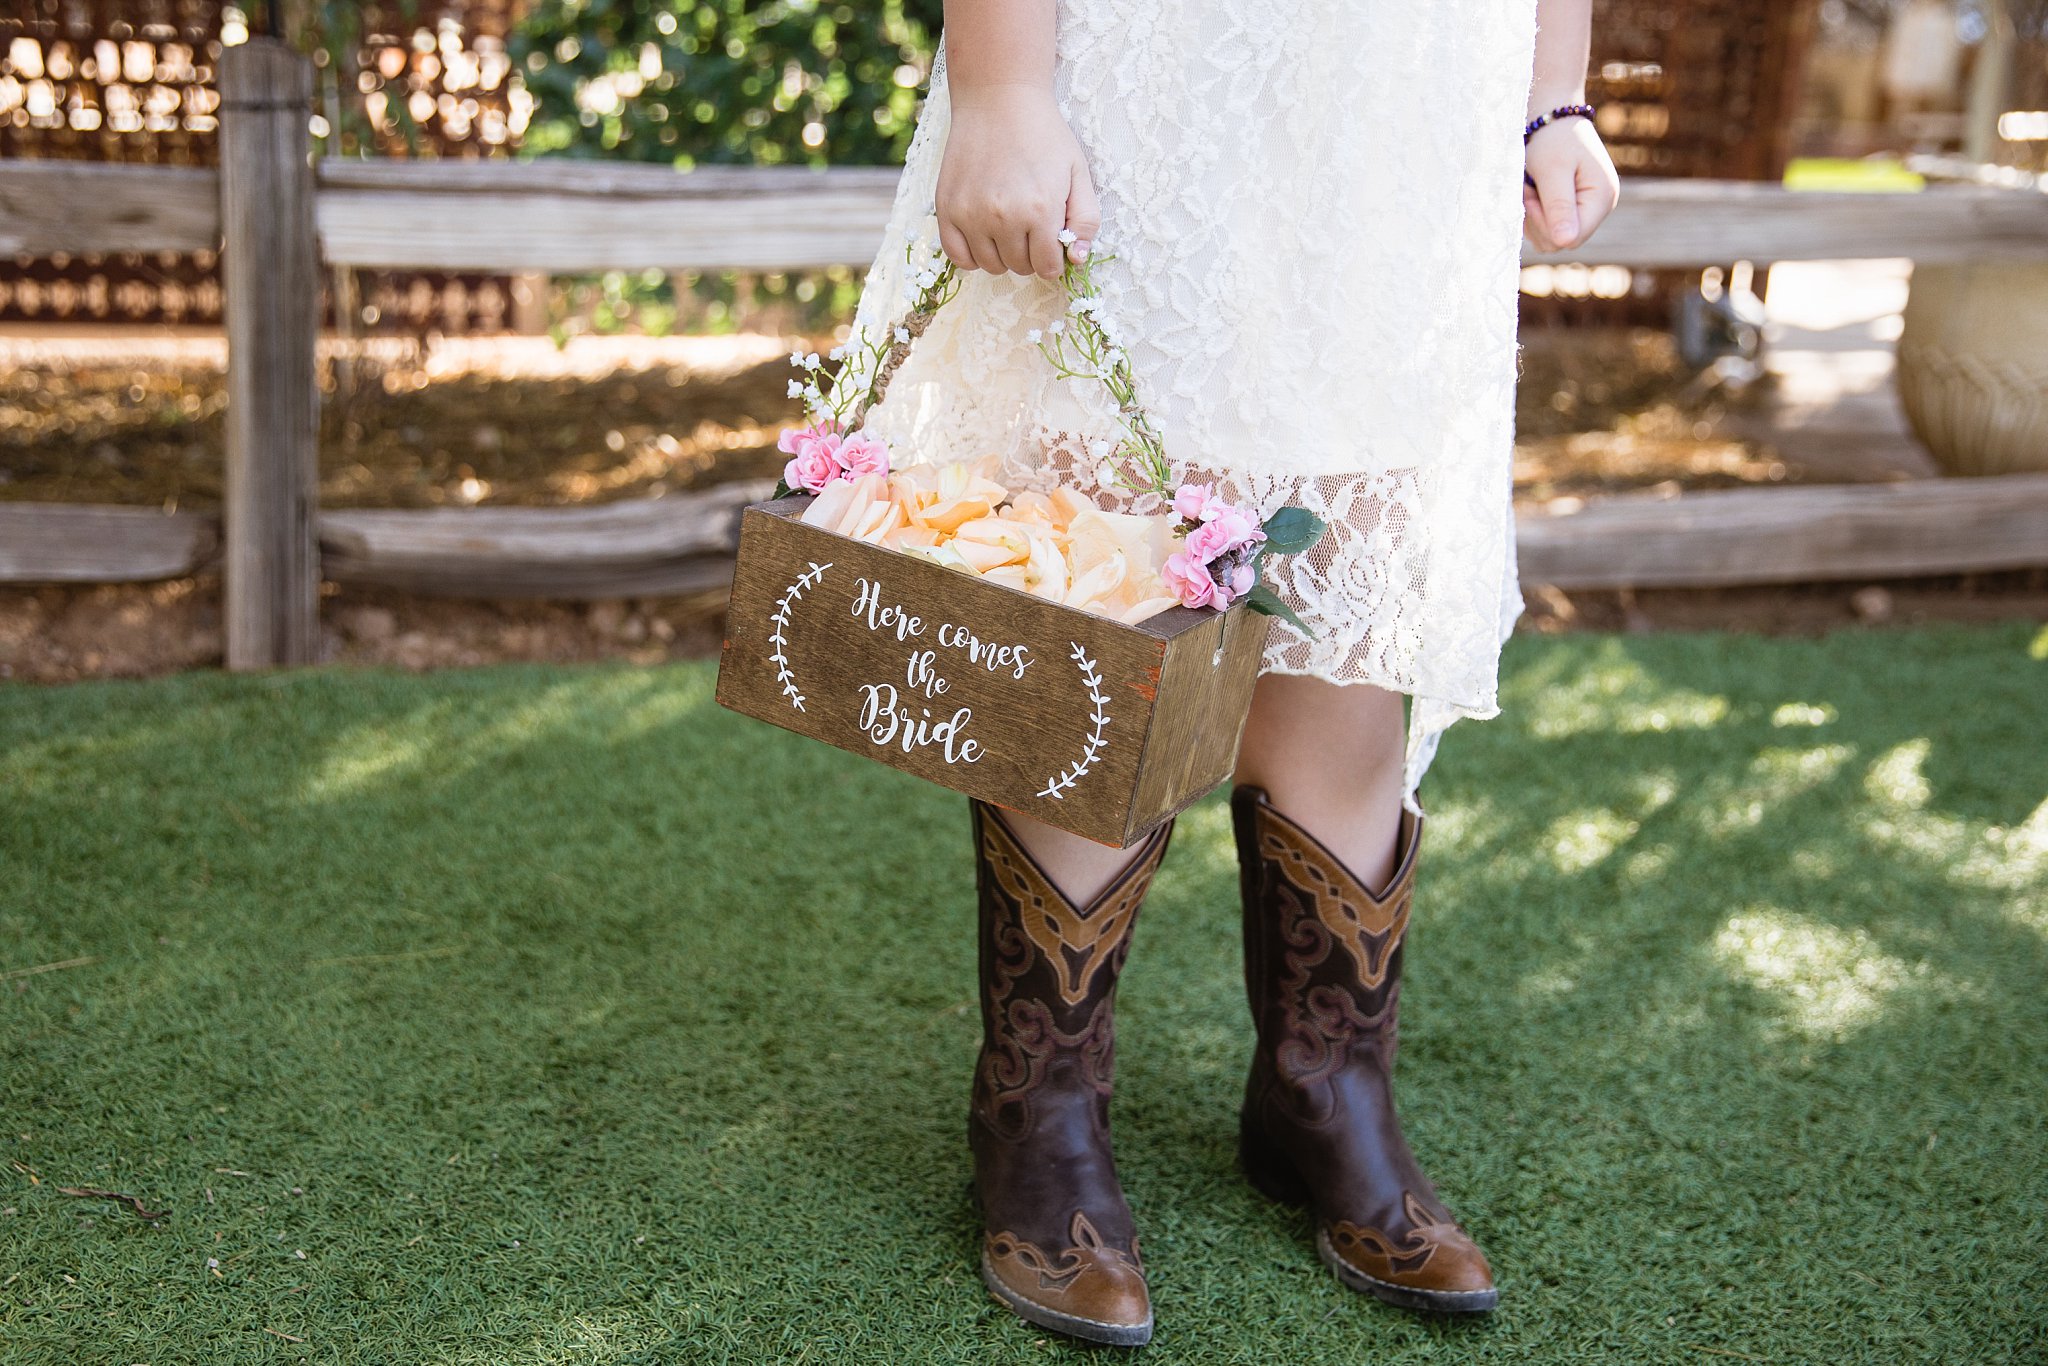 Victoria & Alex's Rustic Wedding at Whispering Tree Ranch